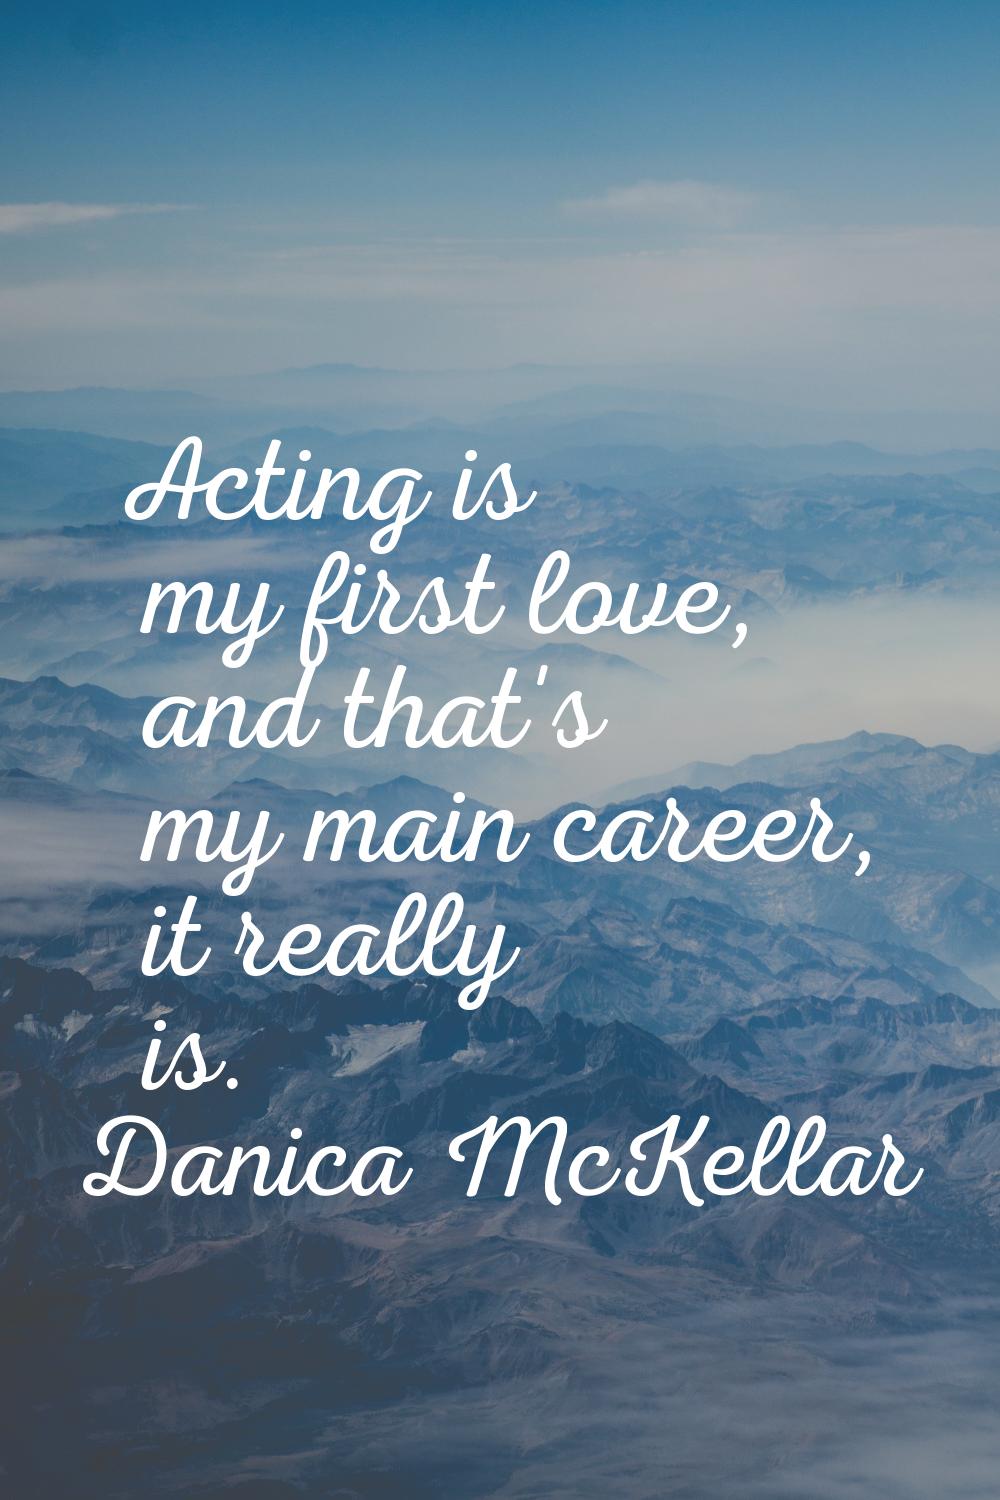 Acting is my first love, and that's my main career, it really is.